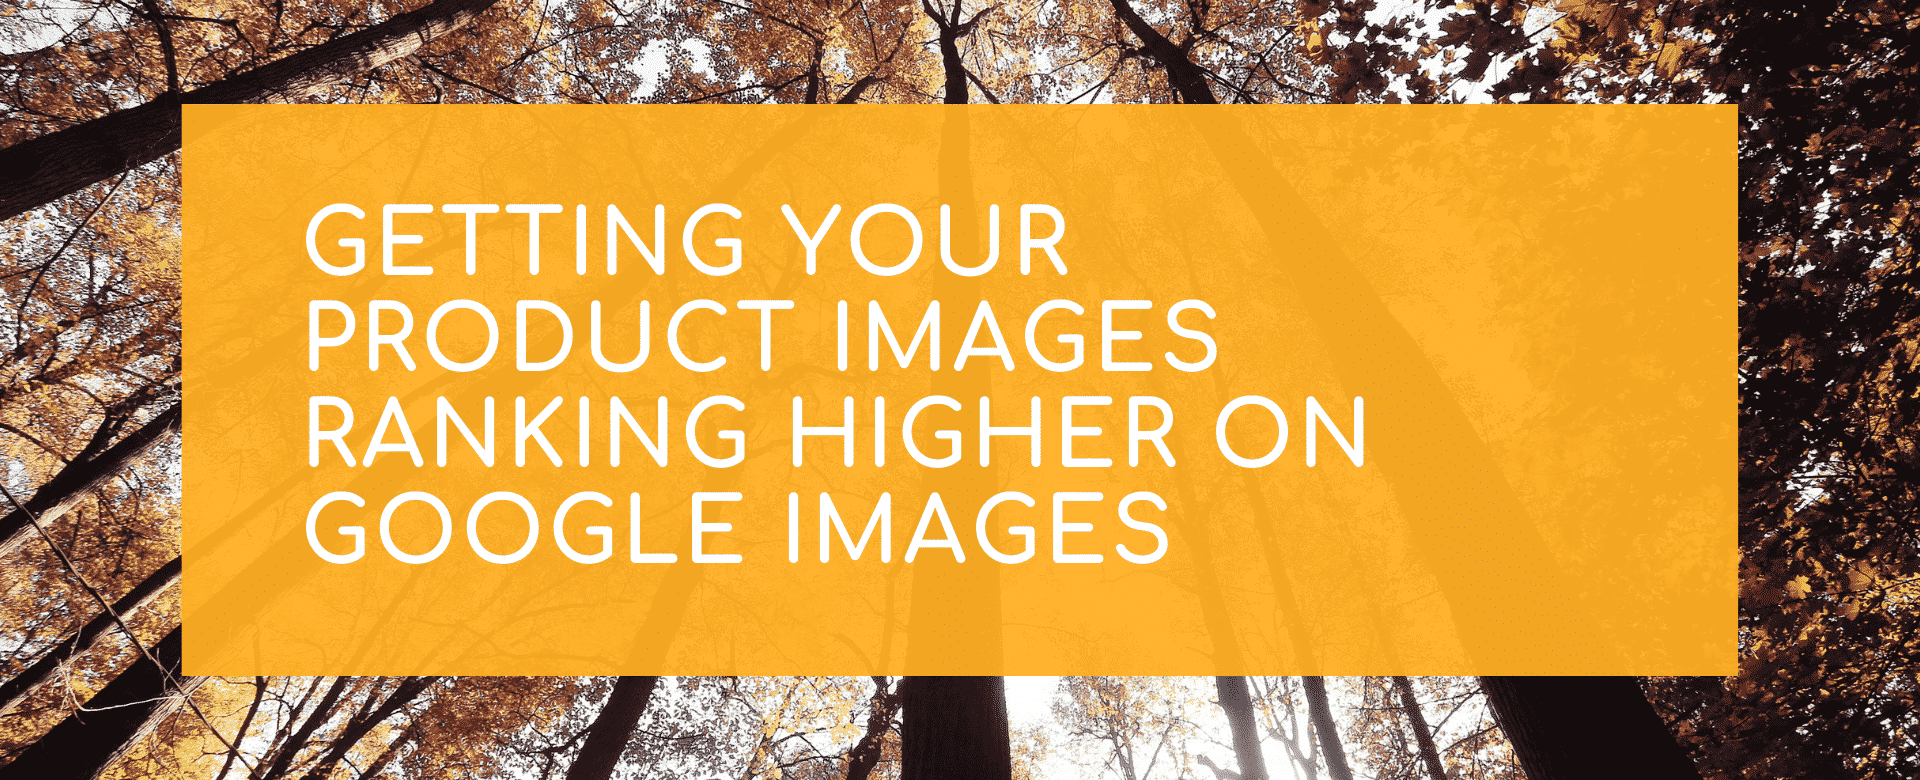 Getting your product images ranking higher on Google images